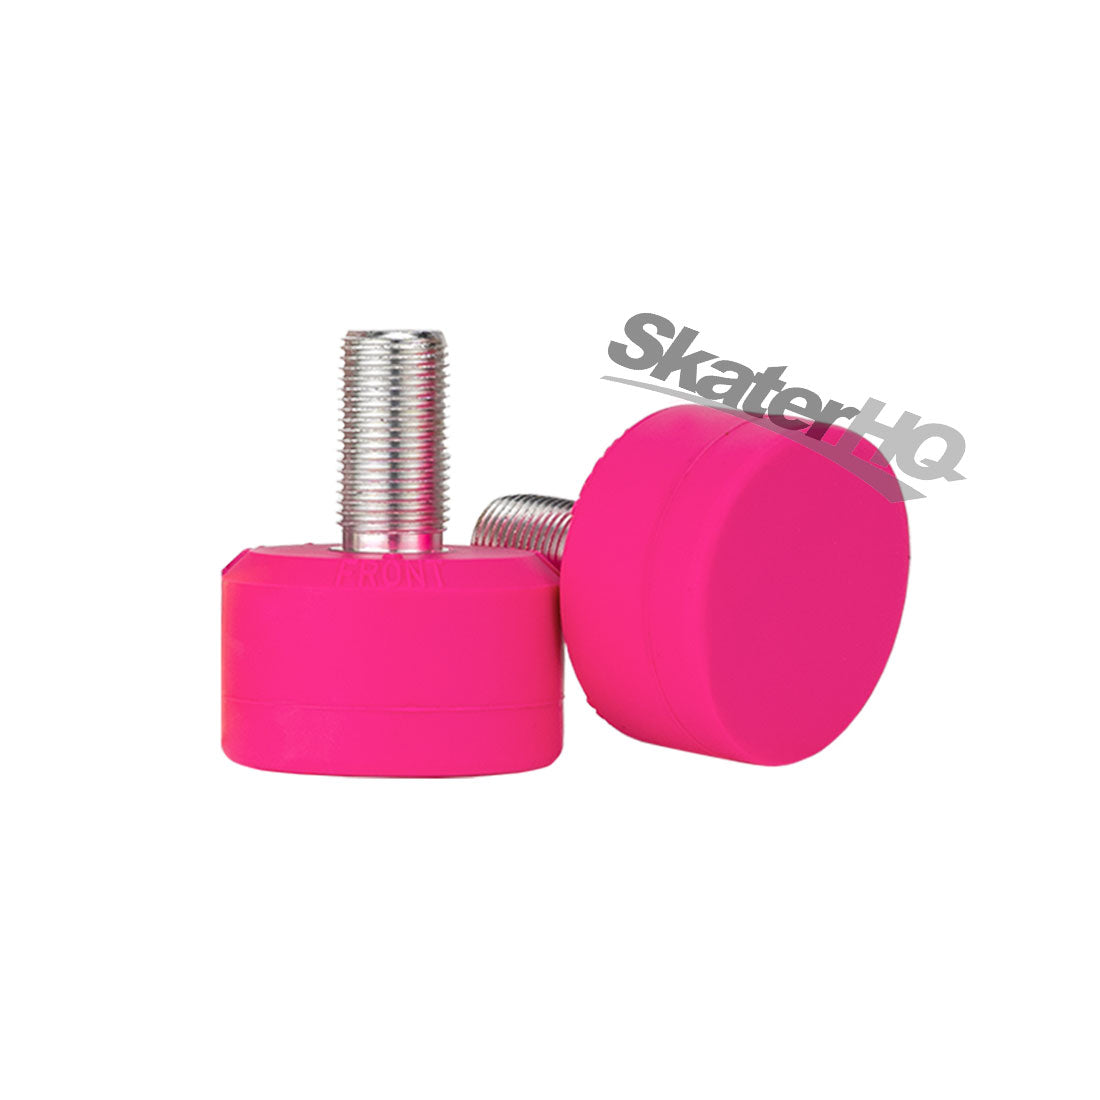 Gumball Toe Stops - Long/Standard - Cherry 75A Roller Skate Hardware and Parts